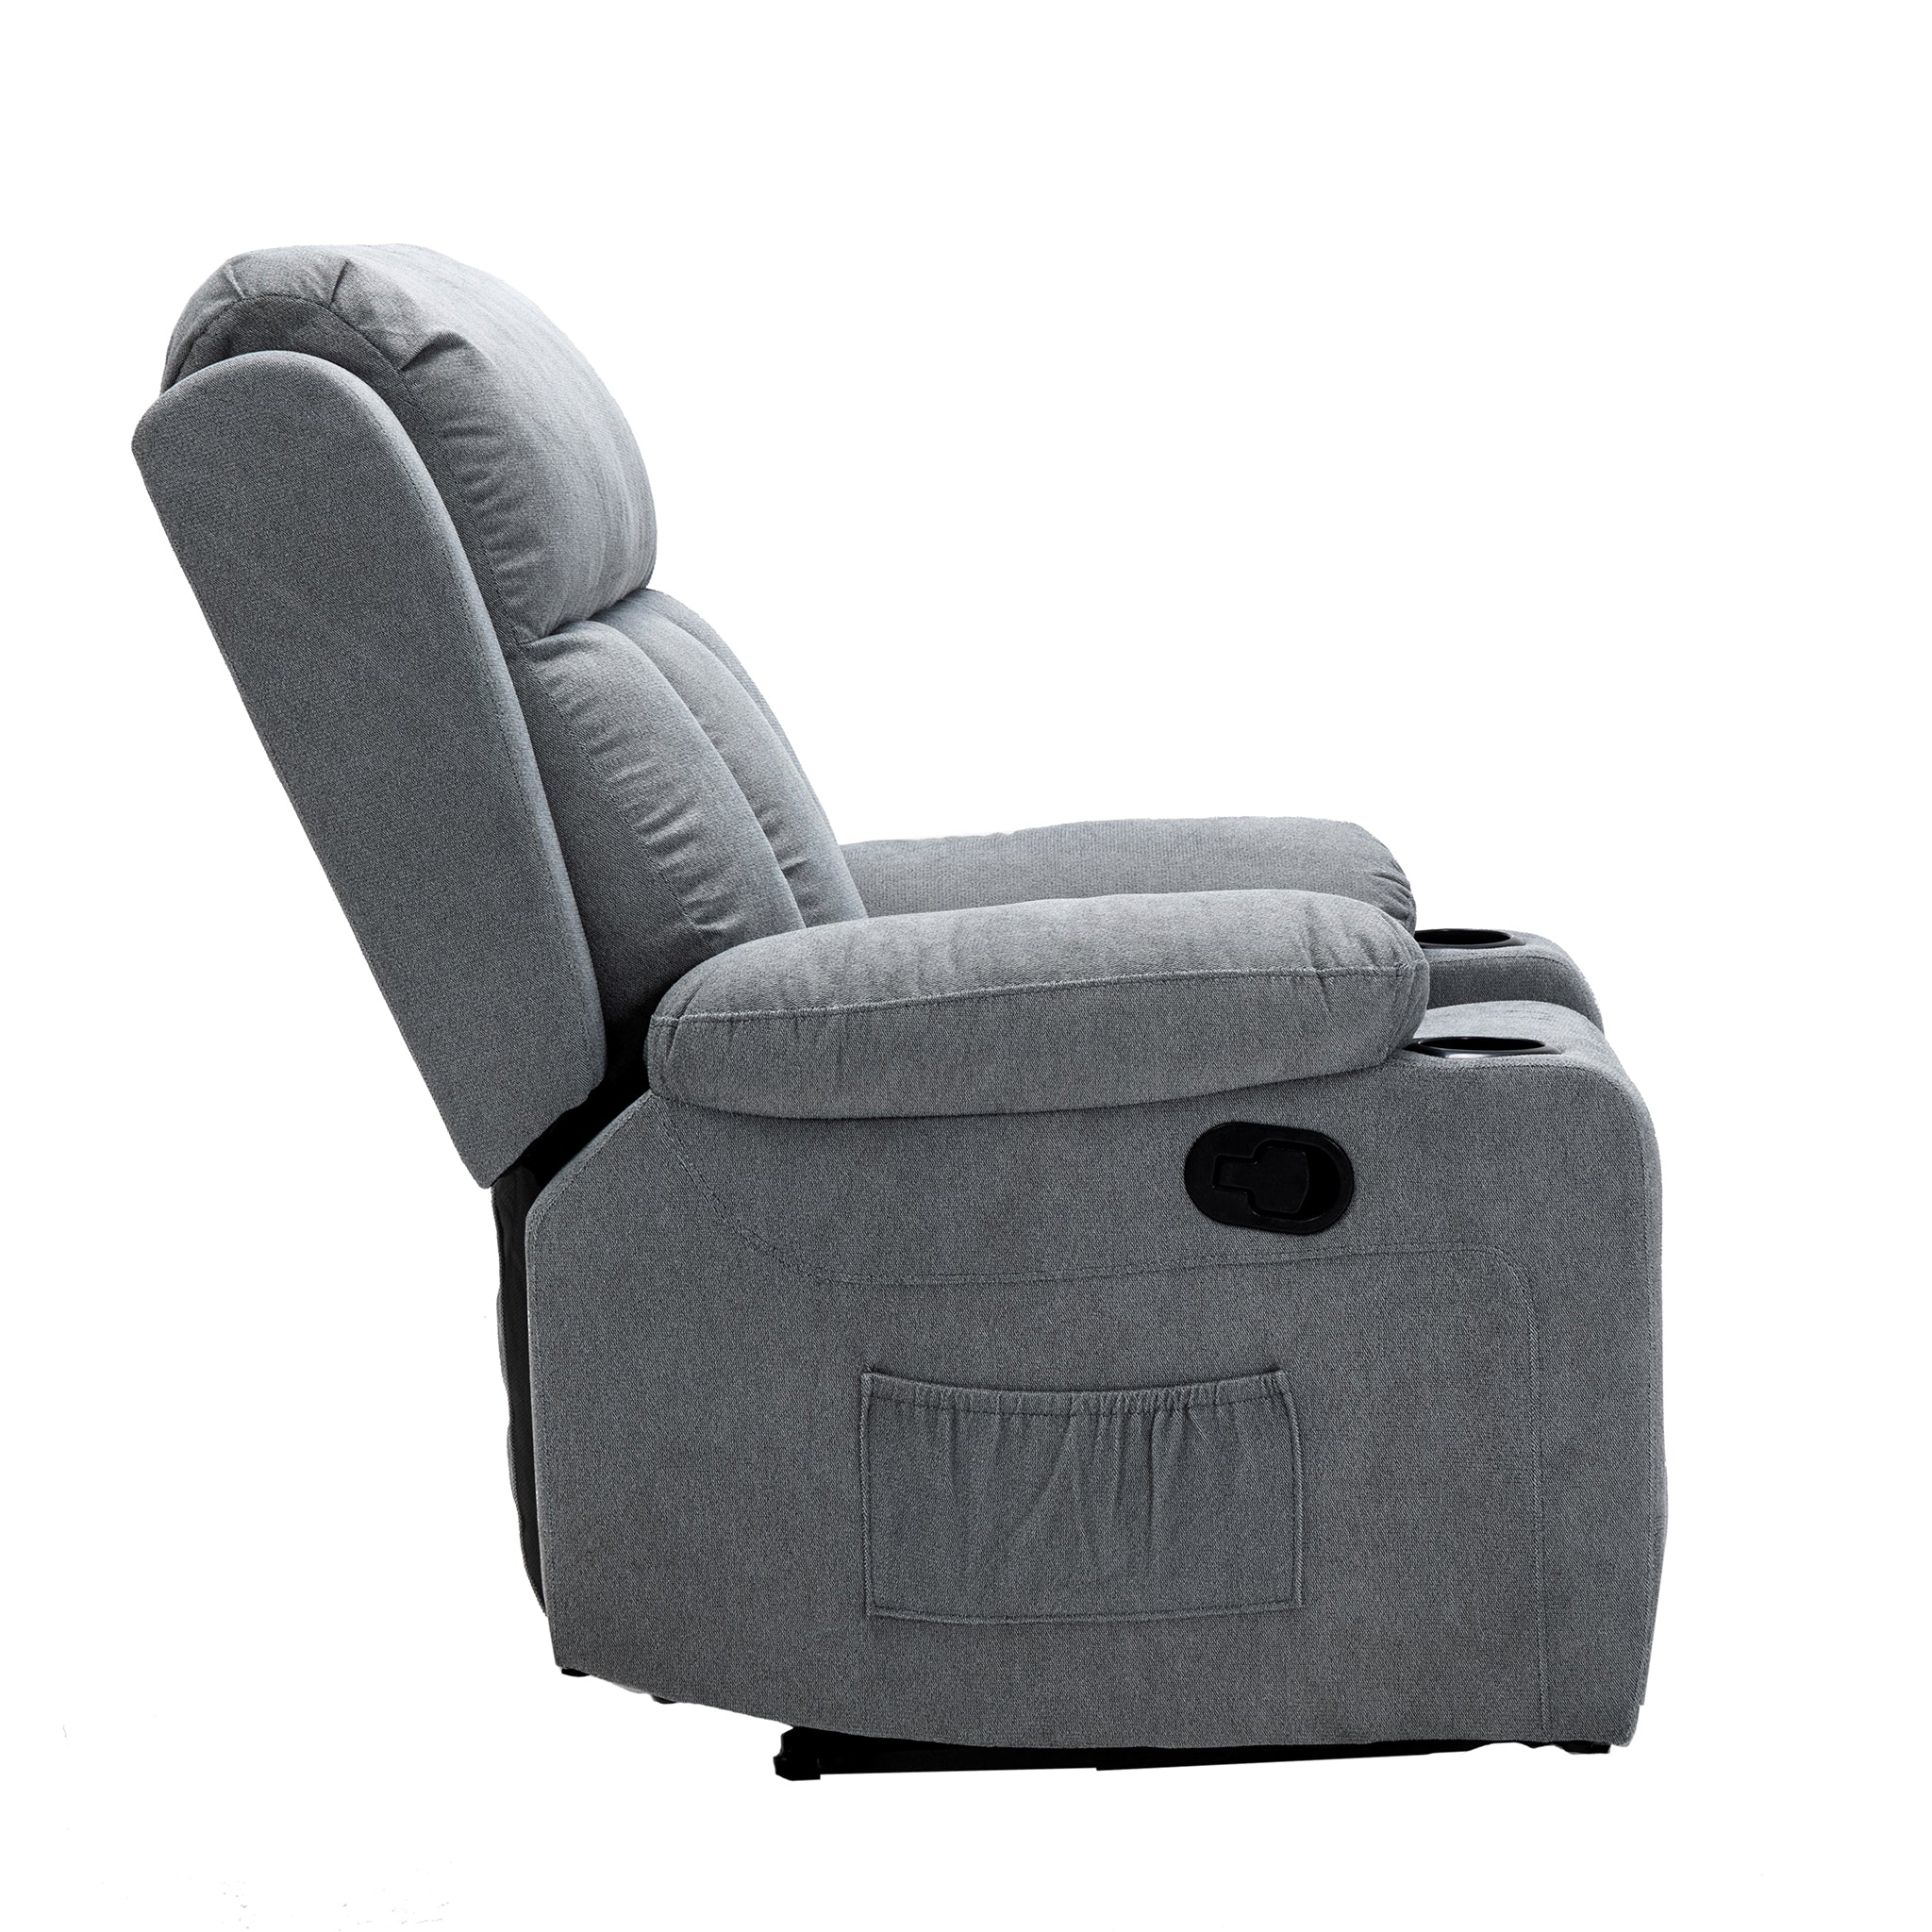 Lexi Recliner Armchair in Grey, Model CR-2032, Comfortable Seating Furniture1